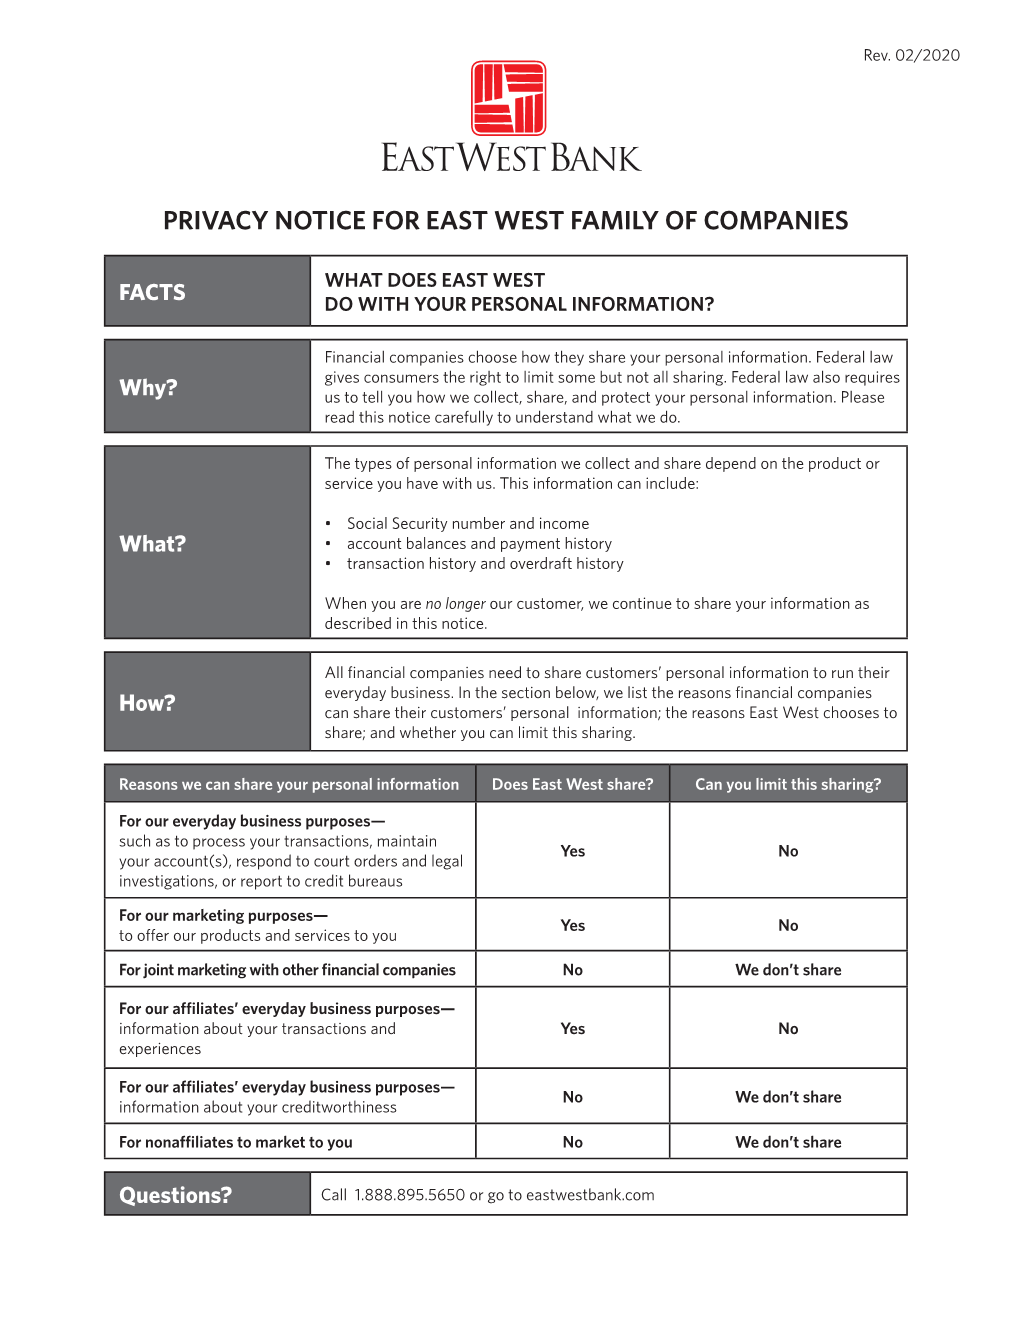 Privacy Notice for East West Family of Companies